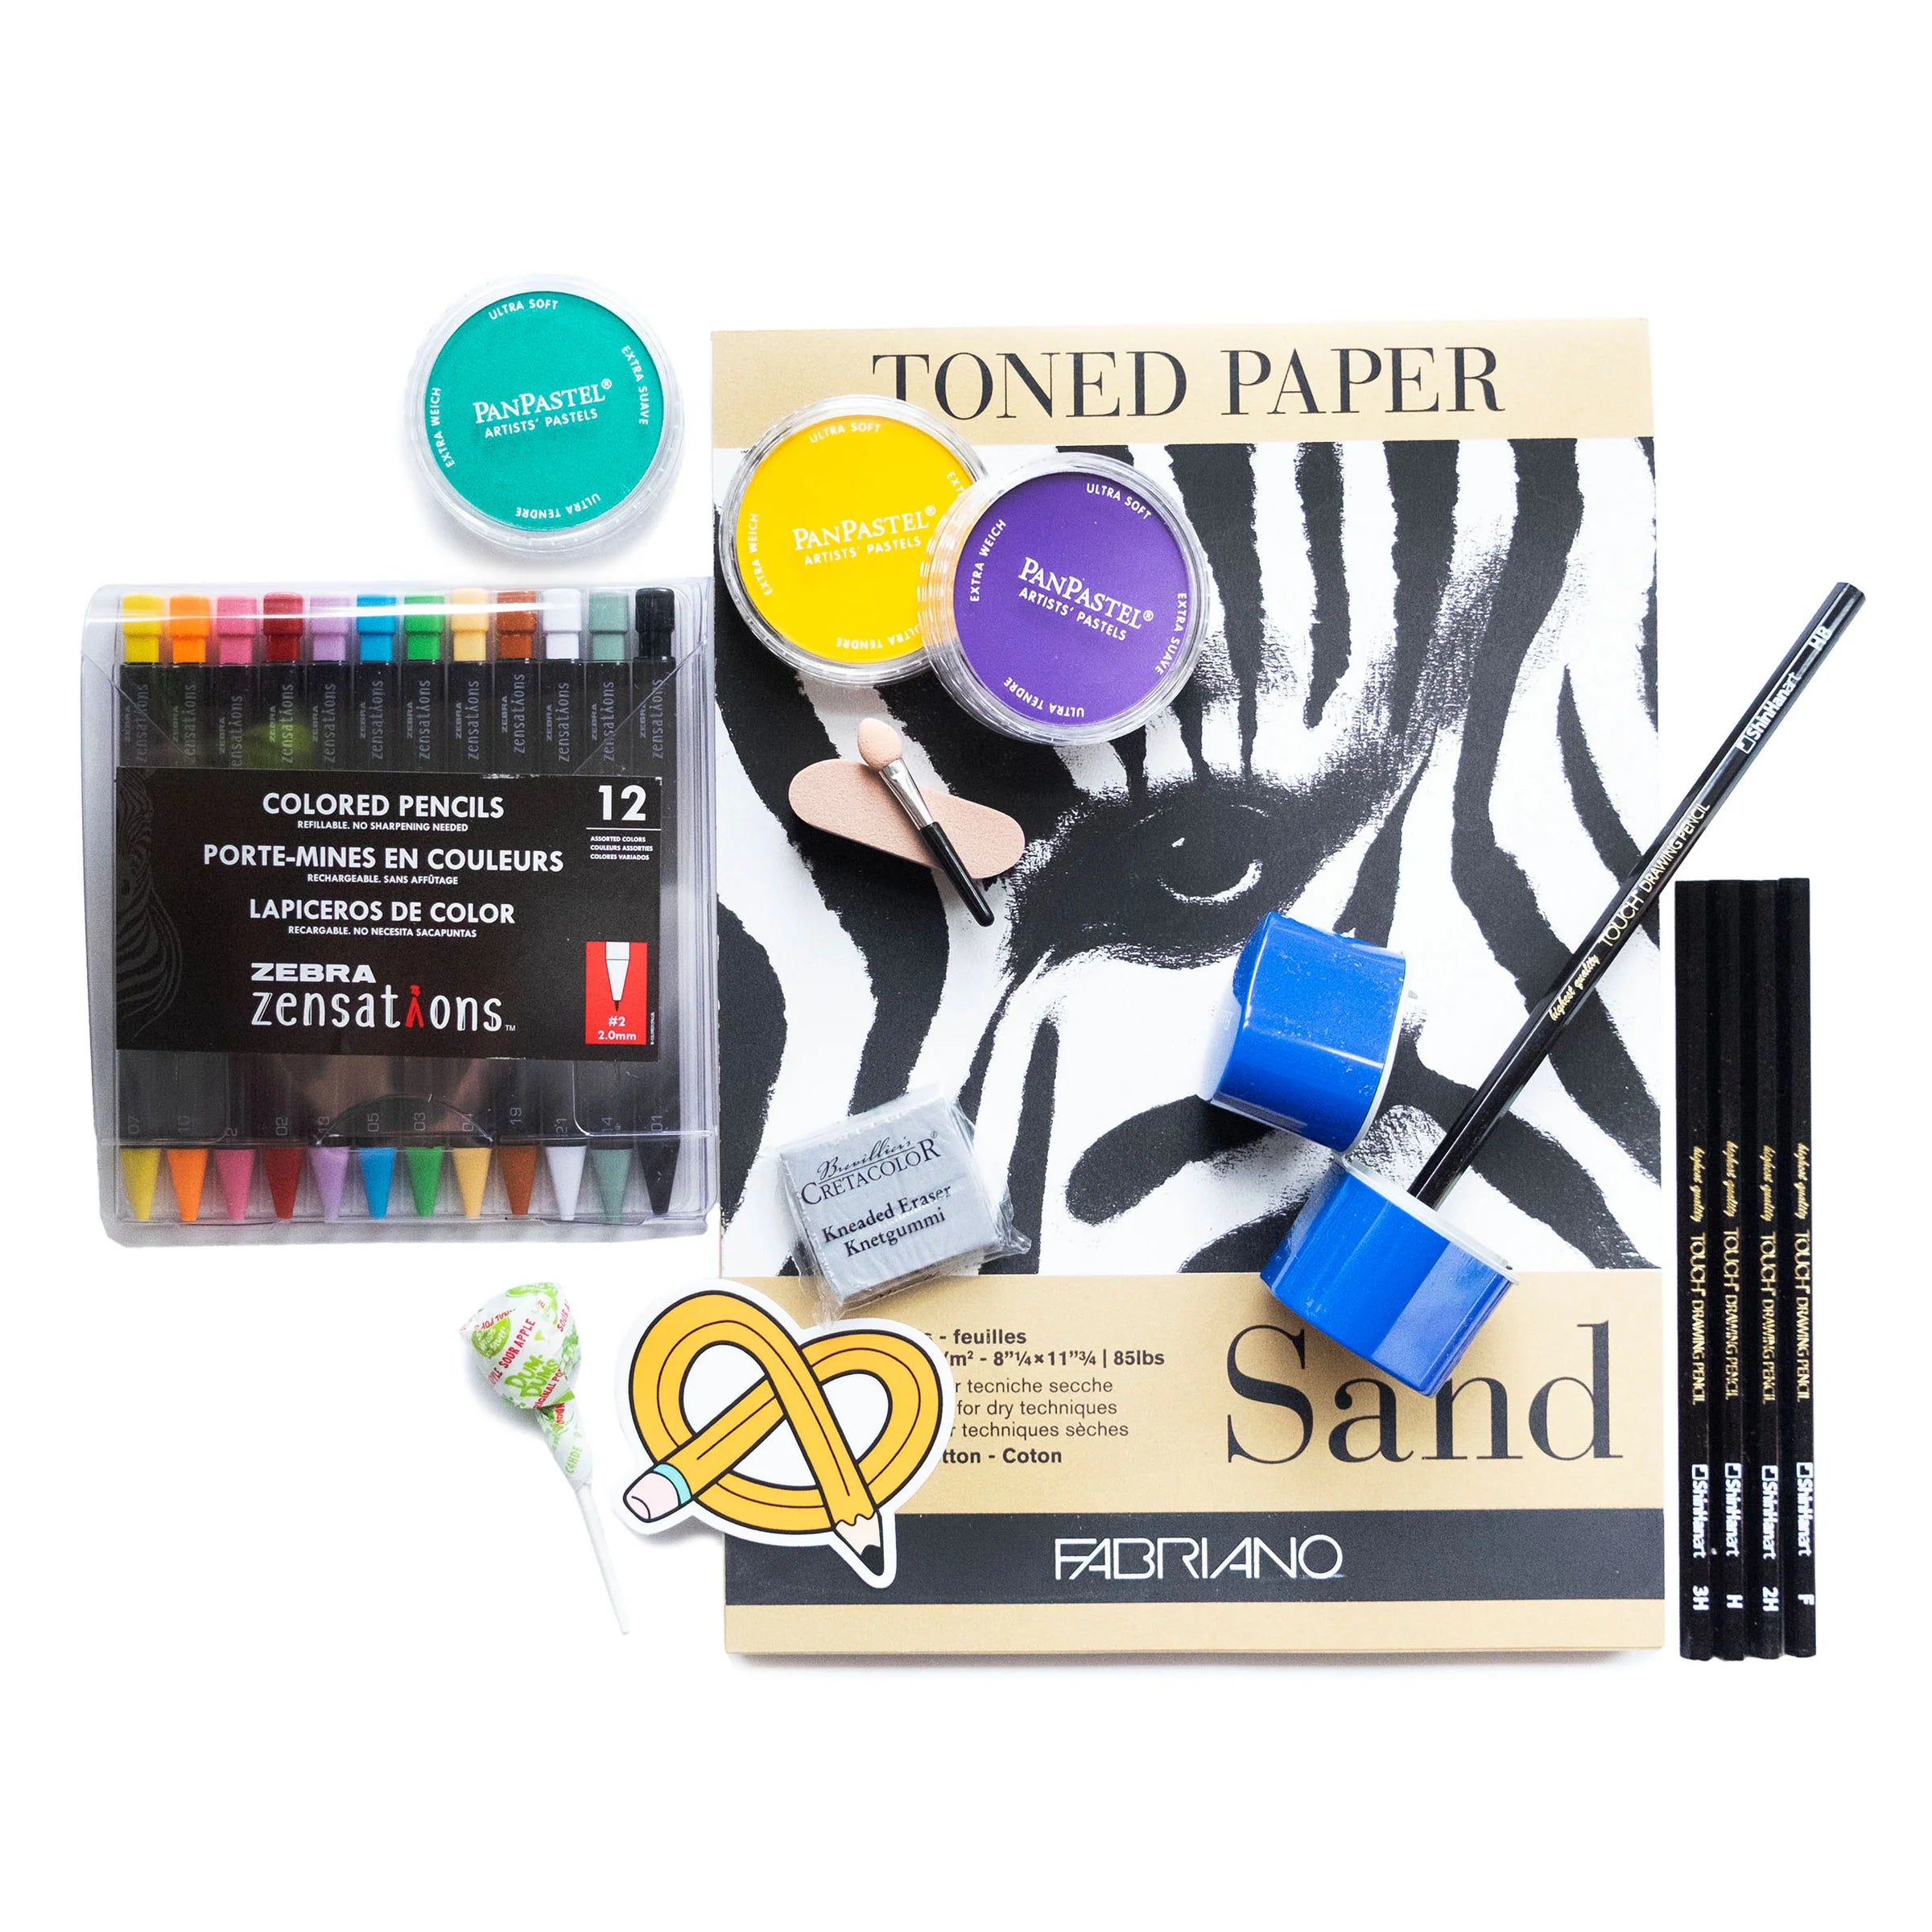 ArtSnacks - The Best Art Supply Subscription Boxes.